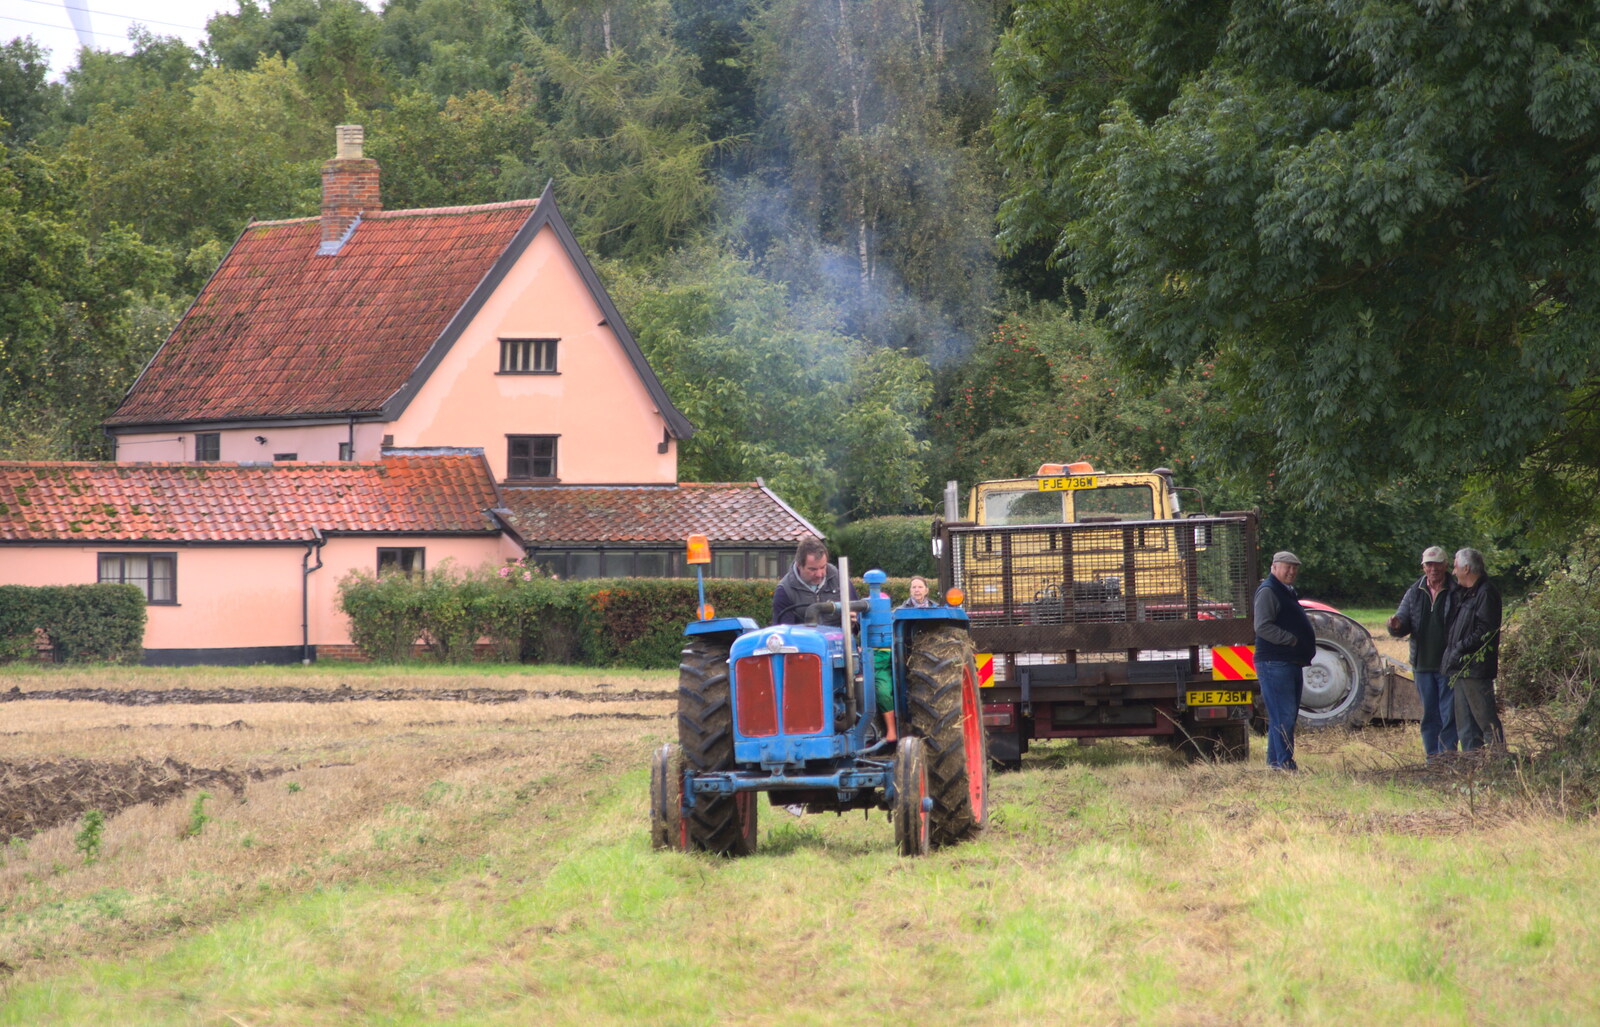 Blue smoke fills the air from Ploughing and Pizza, Thrandeston and Bury St. Edmunds, Suffolk - 17th September 2017